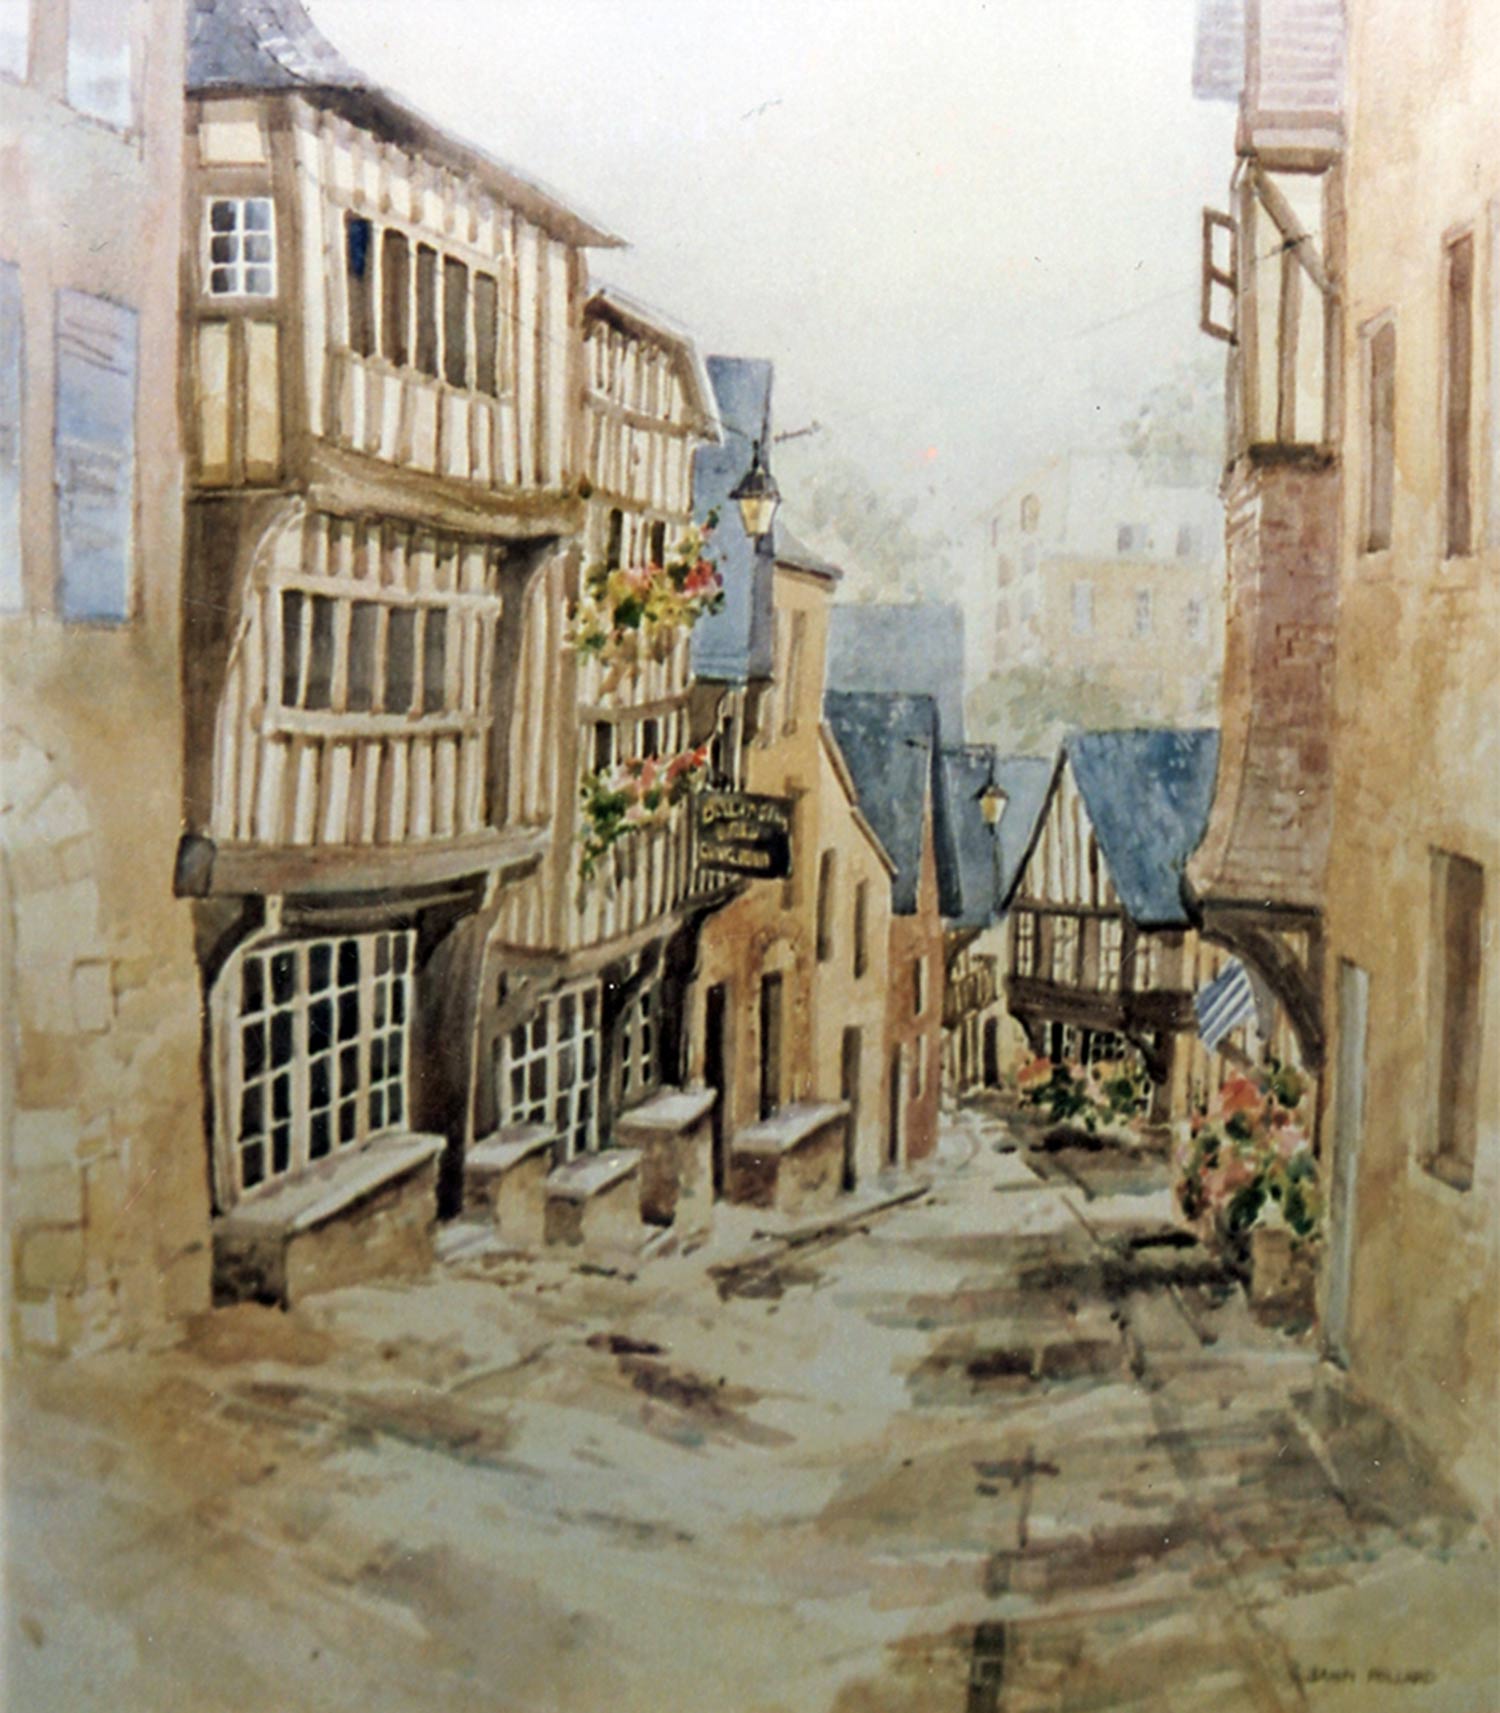 Streets of Dinan, Brittany